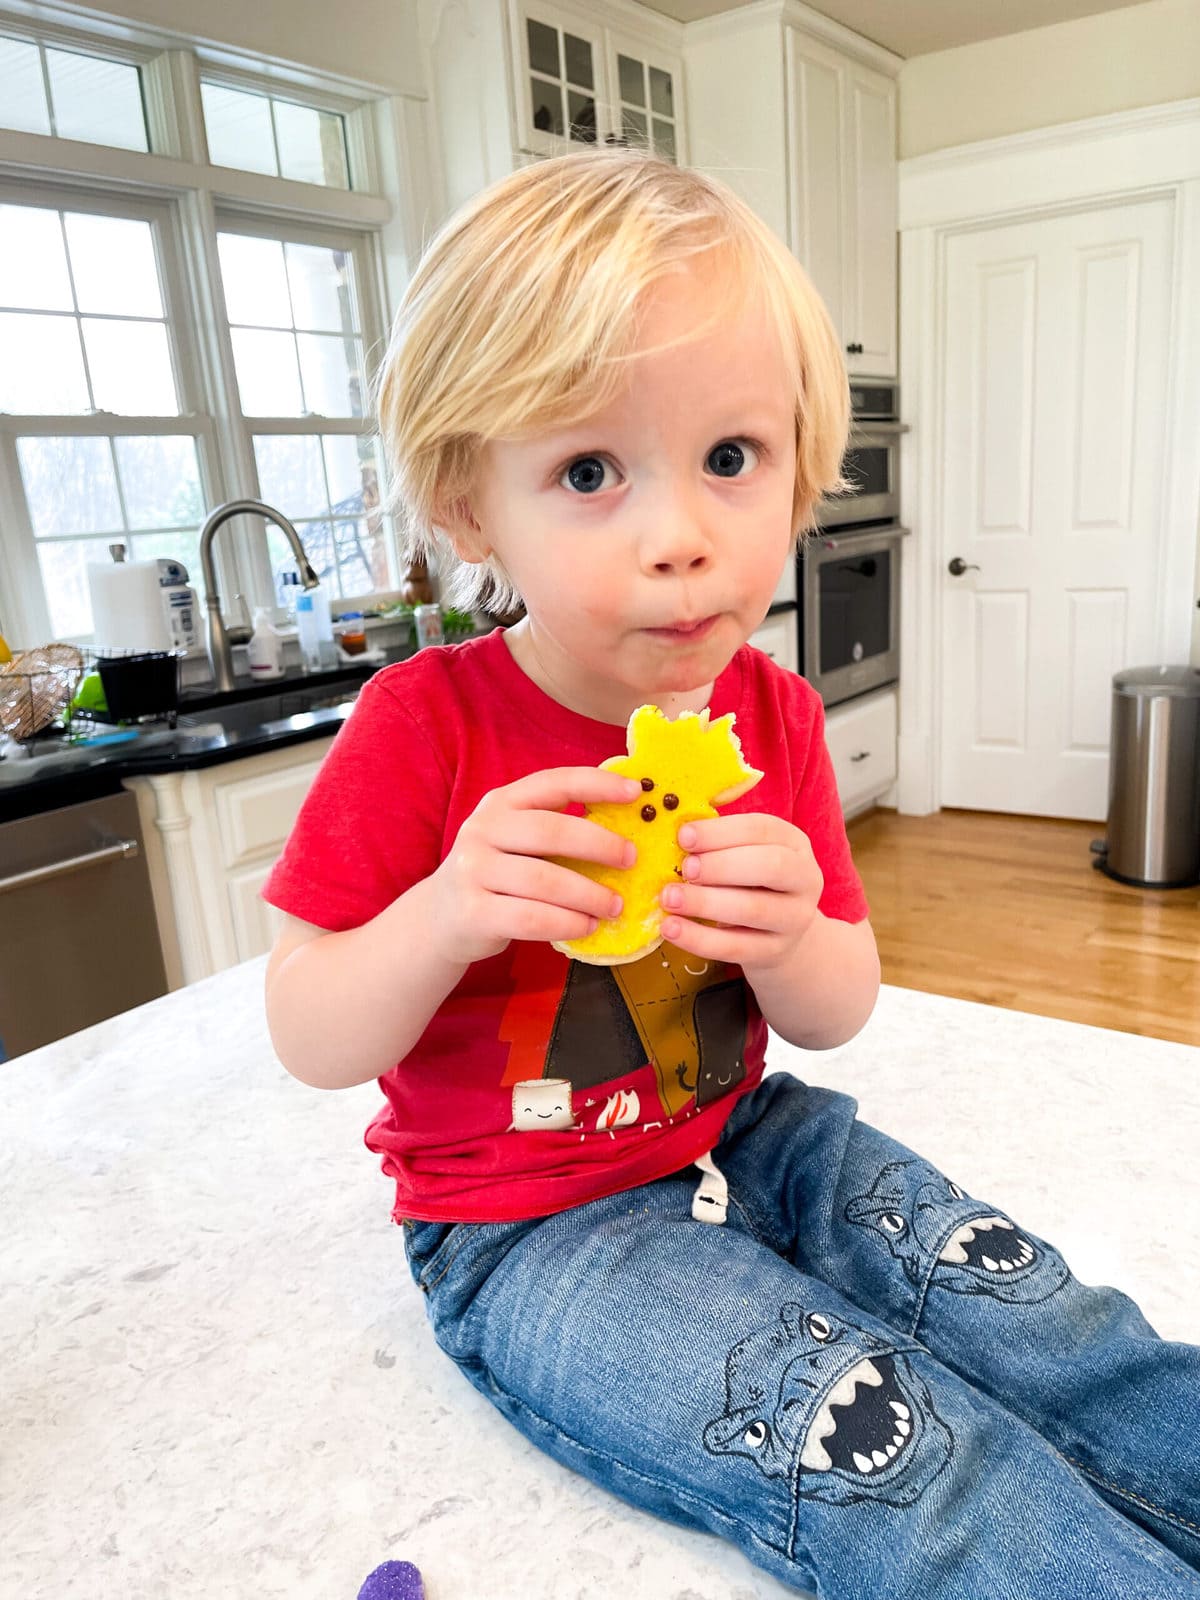 a young blond boy sitting on a countertop enjoying a yellow rabbit shaped sugar cookie